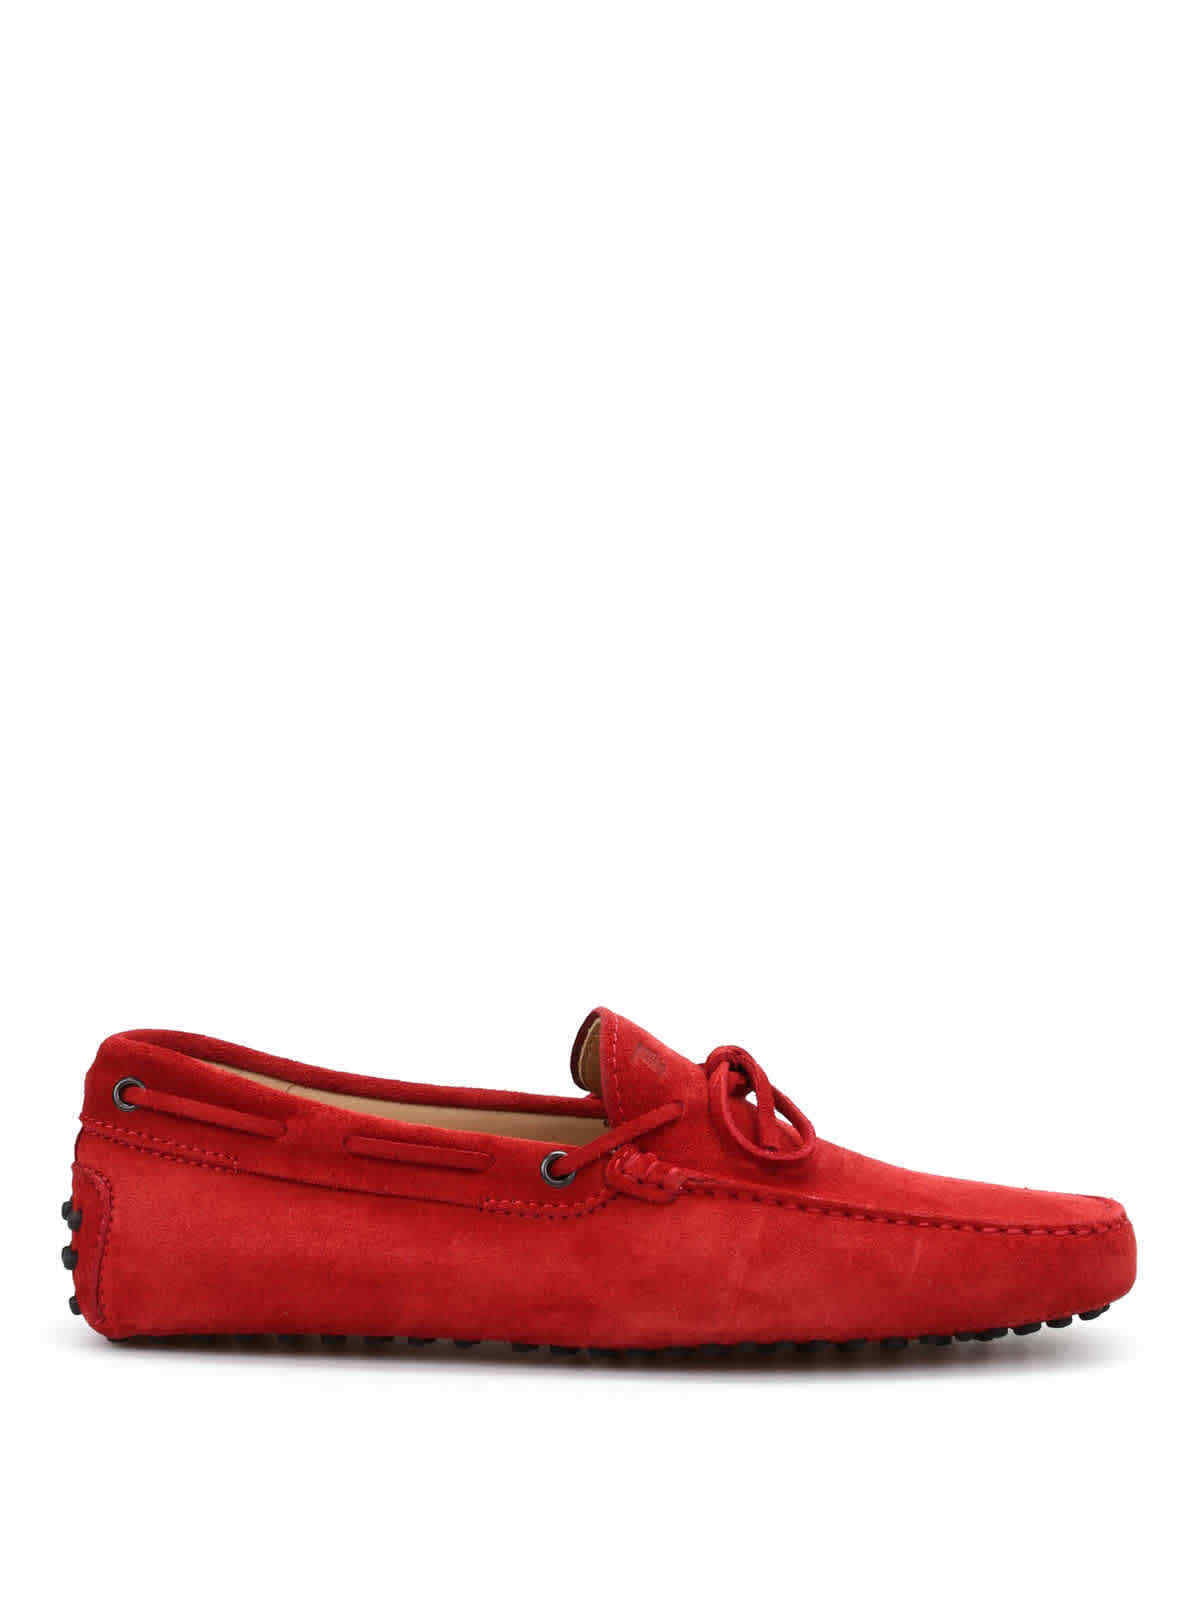 TOD'S Men's Leather Moccasins RED SUEDE MOCCASIN DRIVERS SHOES